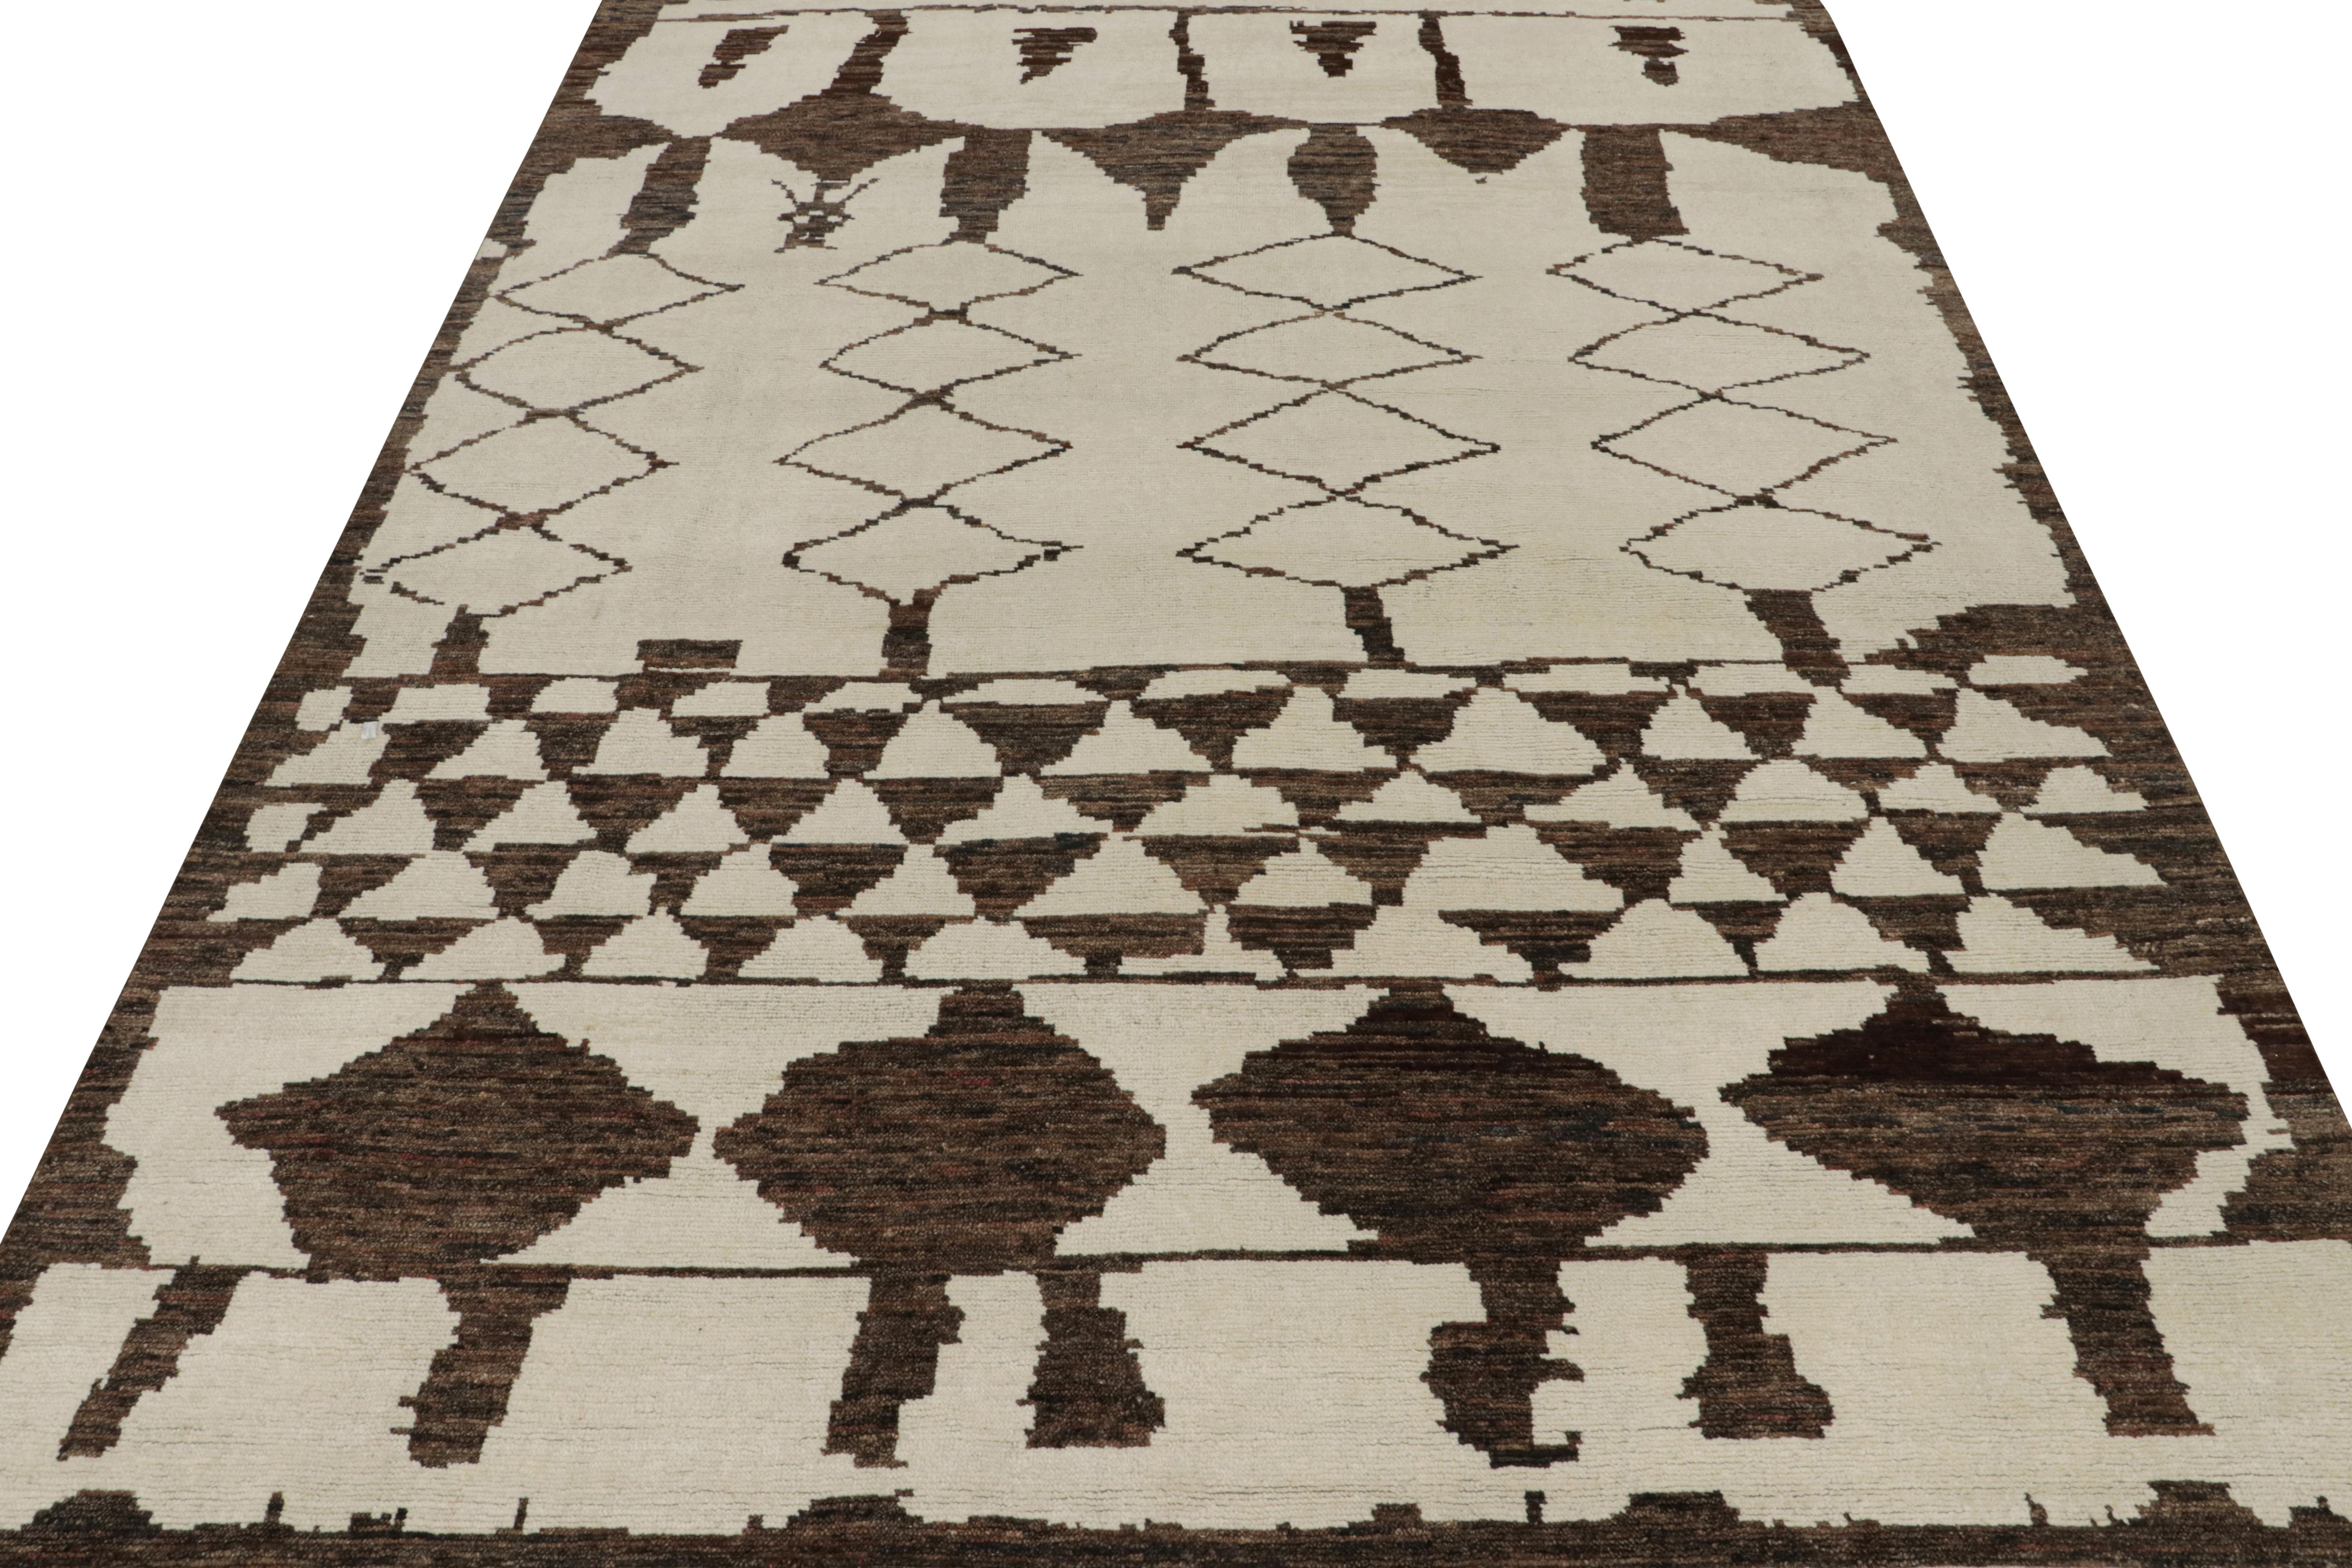 Indian Rug & Kilim’s Modern Moroccan Style Rug in Beige and Brown Geometric Patterns For Sale